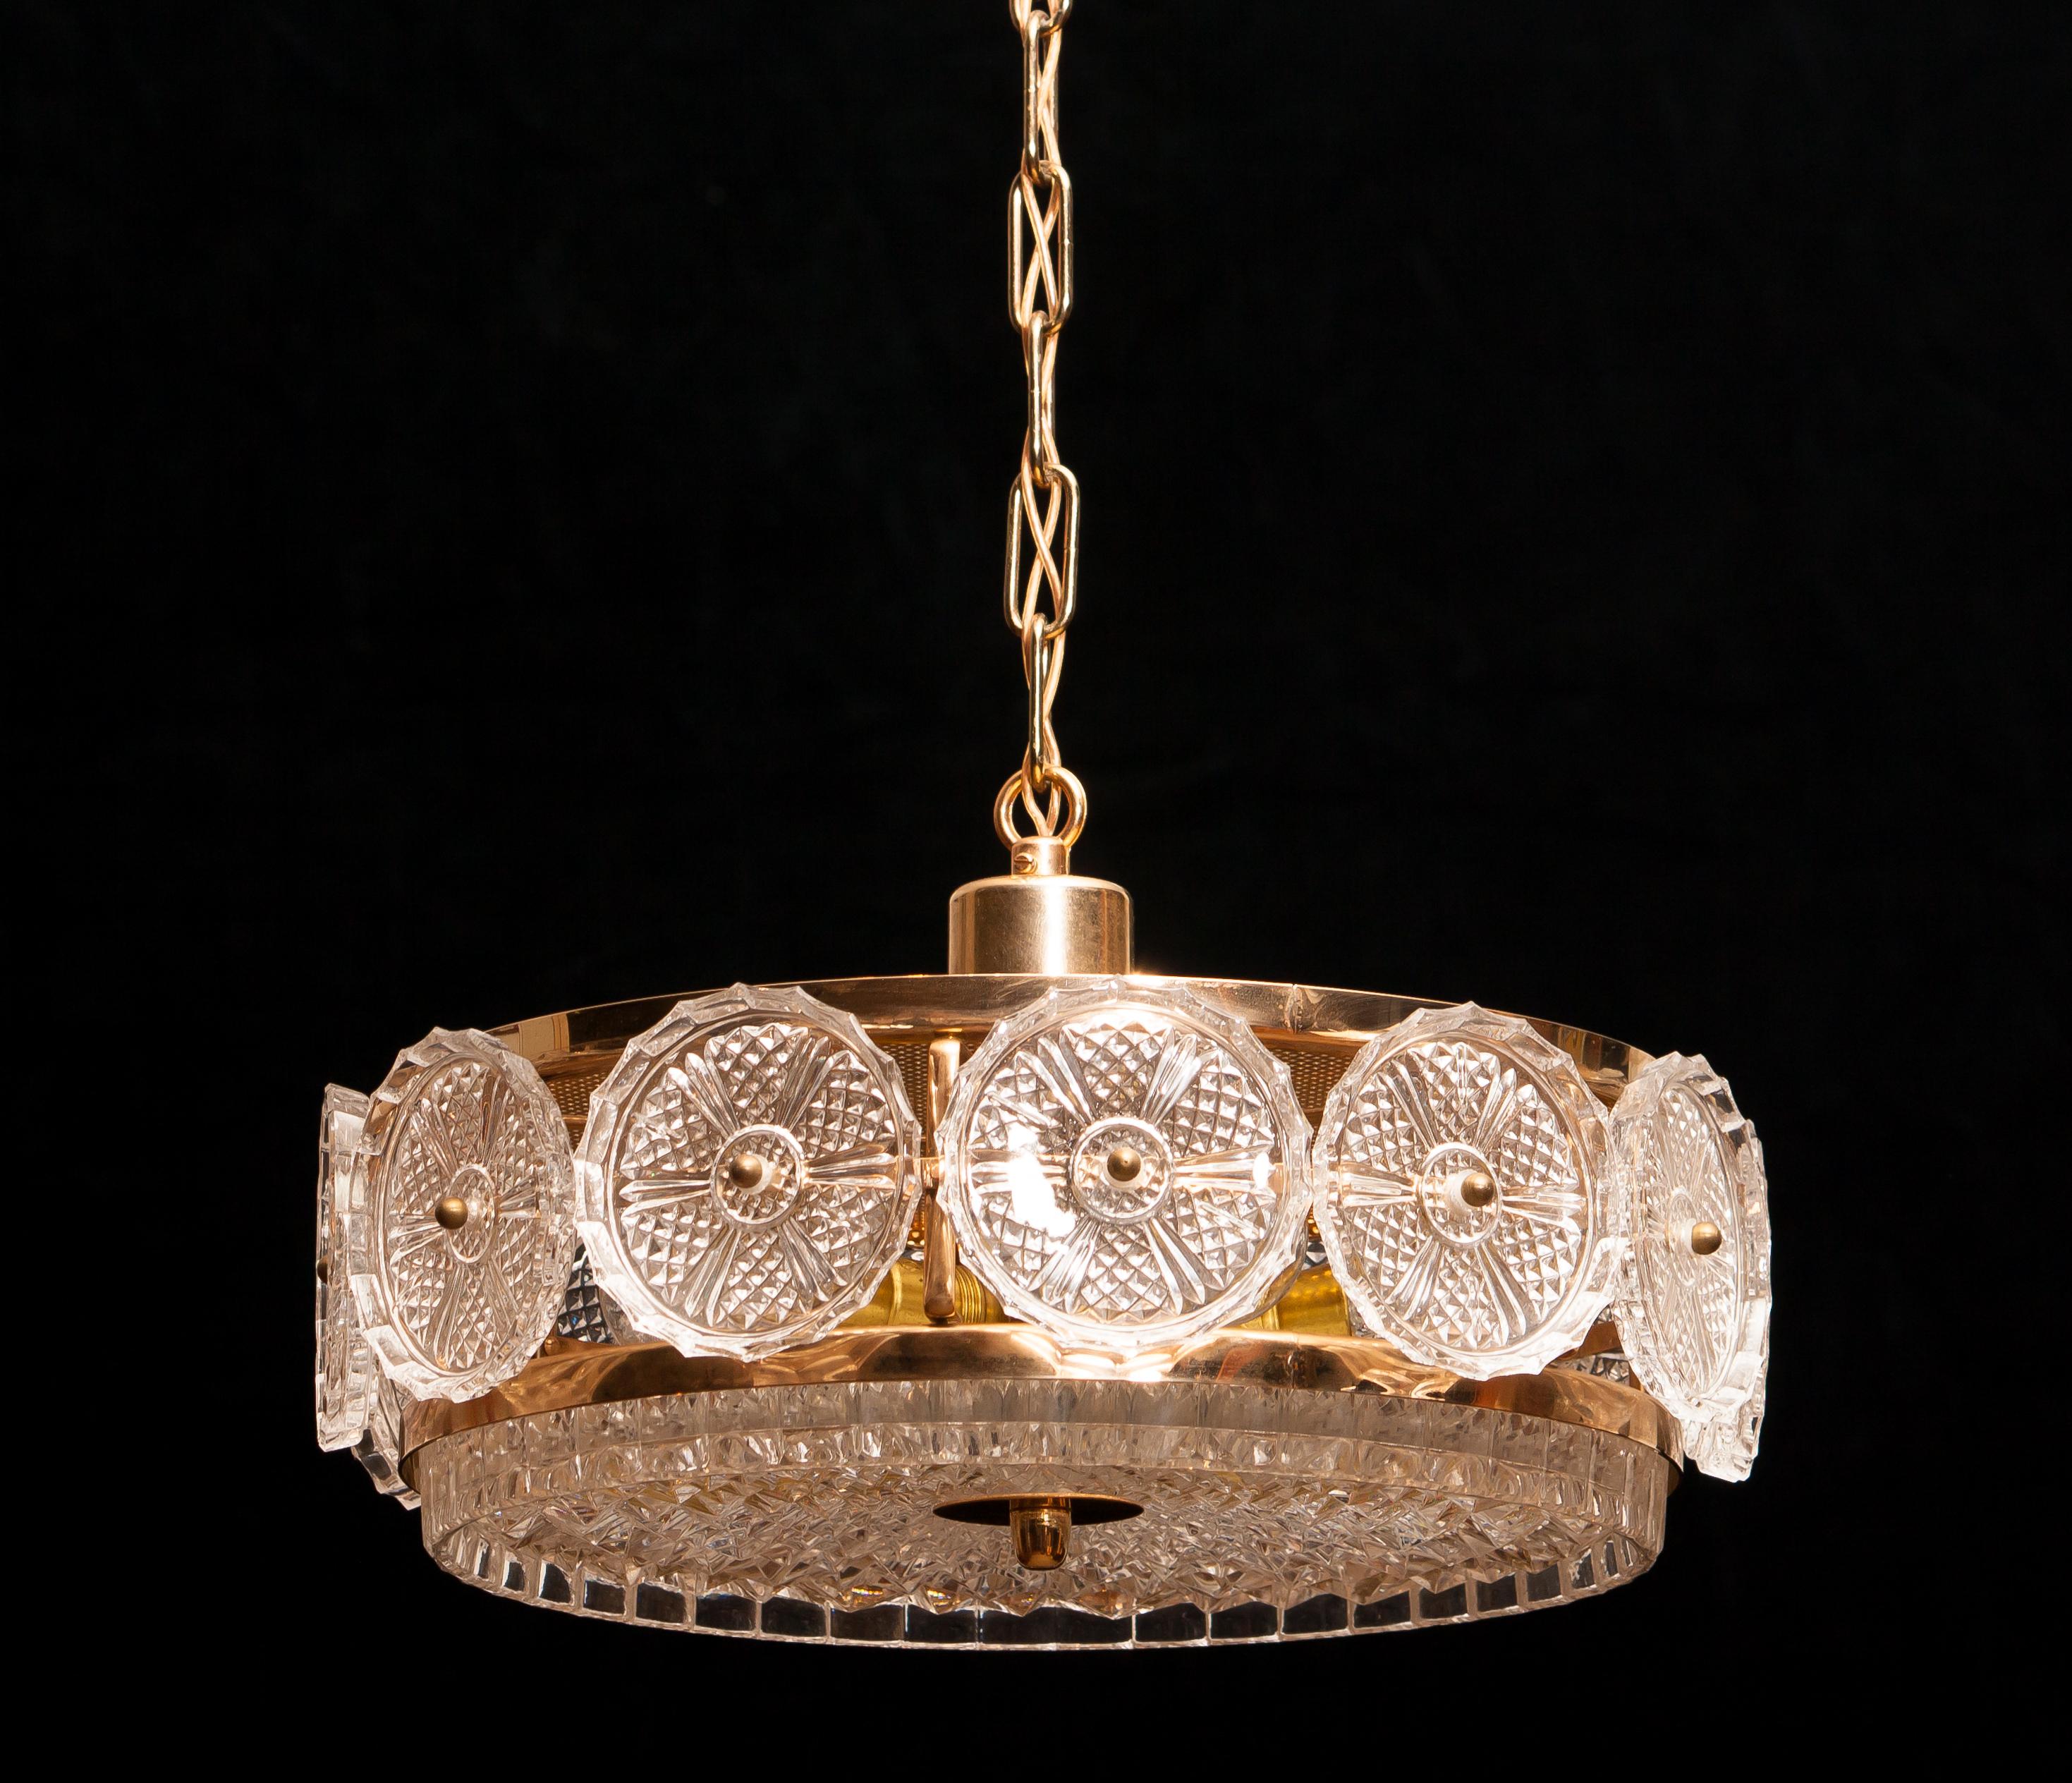 Beautiful lamp designed by Carl Fagerlund for Orrefors, Sweden.
This pendant is made of brass and lovely elements of glass on the edge.
The total height is 87 cm but it is easy to make the chain shorter.
It is in a very nice condition.
Period